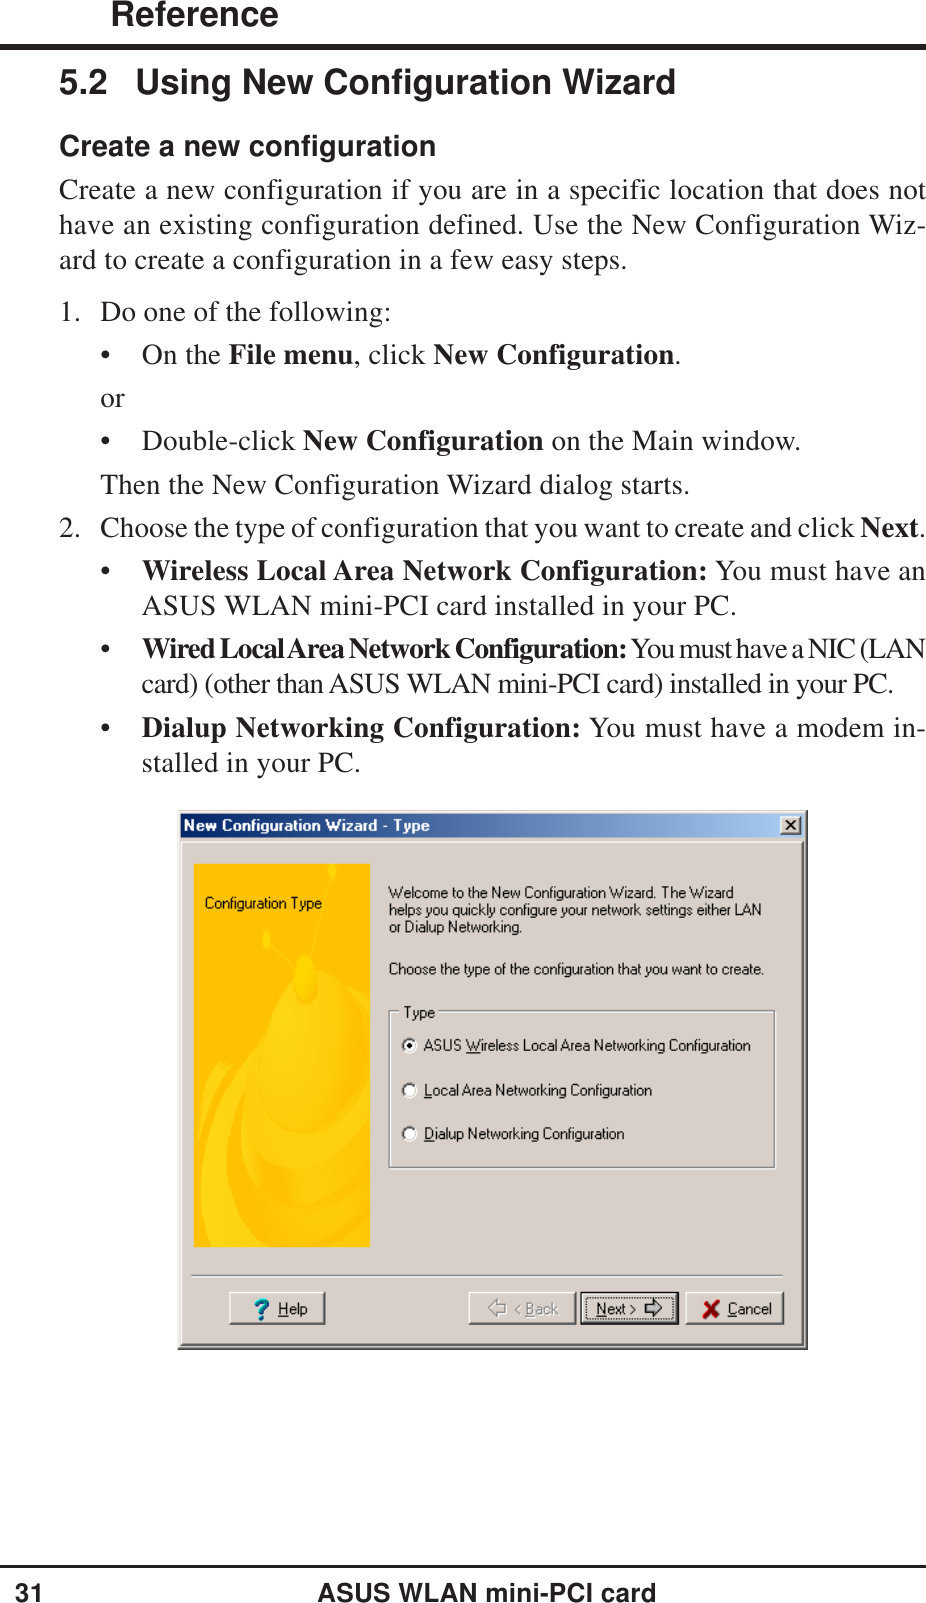 31 ASUS WLAN mini-PCI card ReferenceChapter 35.2 Using New Configuration WizardCreate a new configurationCreate a new configuration if you are in a specific location that does nothave an existing configuration defined. Use the New Configuration Wiz-ard to create a configuration in a few easy steps.1. Do one of the following:• On the File menu, click New Configuration.or• Double-click New Configuration on the Main window.Then the New Configuration Wizard dialog starts.2. Choose the type of configuration that you want to create and click Next.•Wireless Local Area Network Configuration: You must have anASUS WLAN mini-PCI card installed in your PC.•Wired Local Area Network Configuration: You must have a NIC (LANcard) (other than ASUS WLAN mini-PCI card) installed in your PC.•Dialup Networking Configuration: You must have a modem in-stalled in your PC.